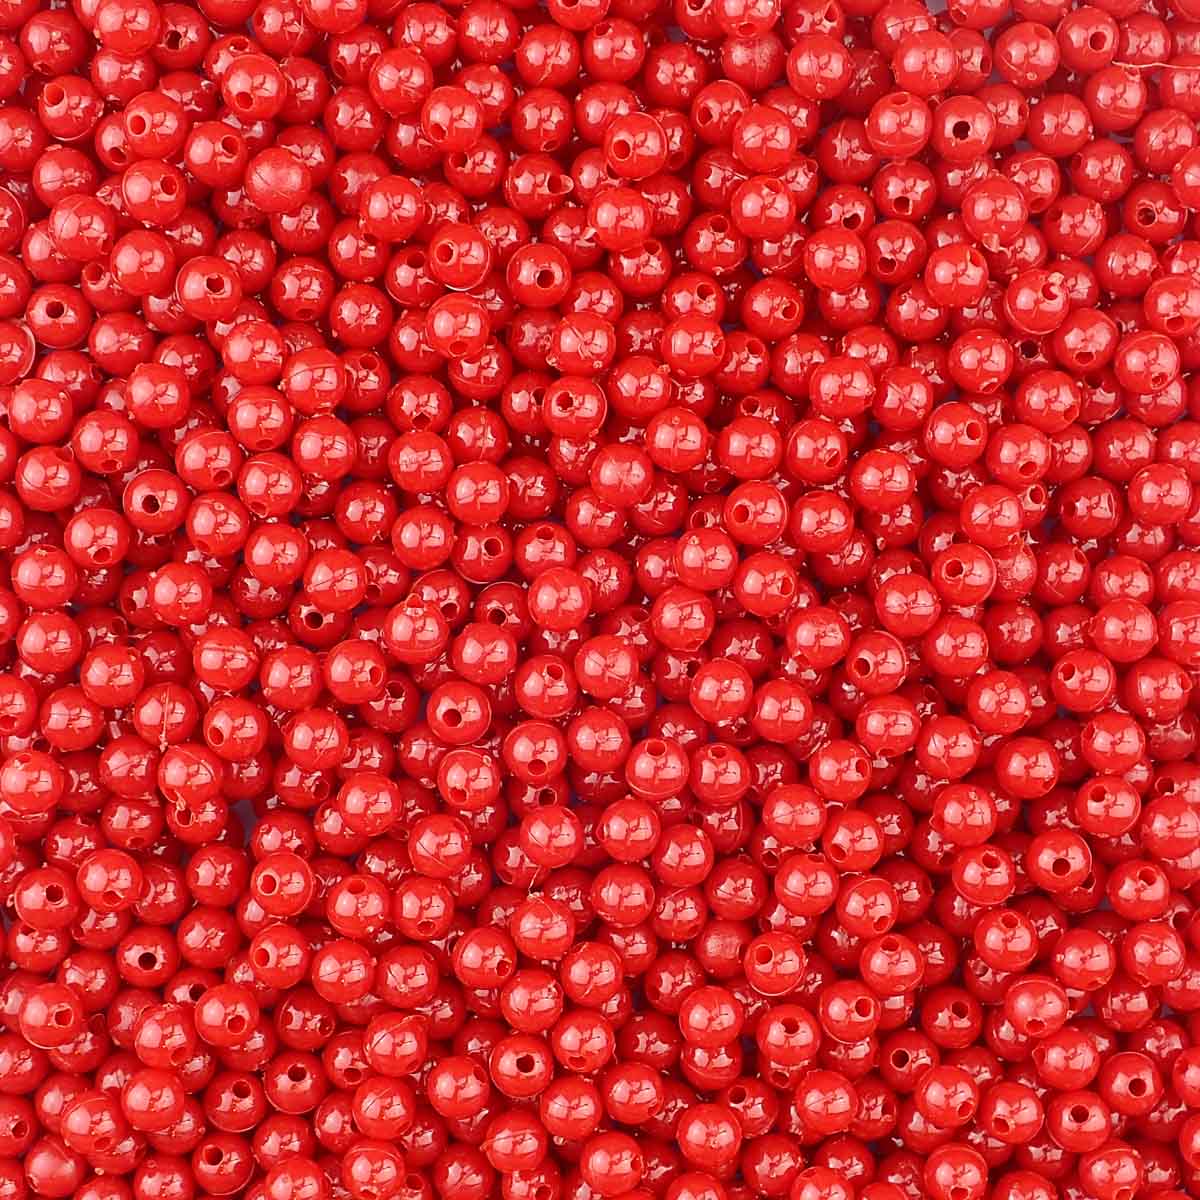 6mm Round Plastic Craft Beads, Red Opaque, 500 beads - Pony Bead Store